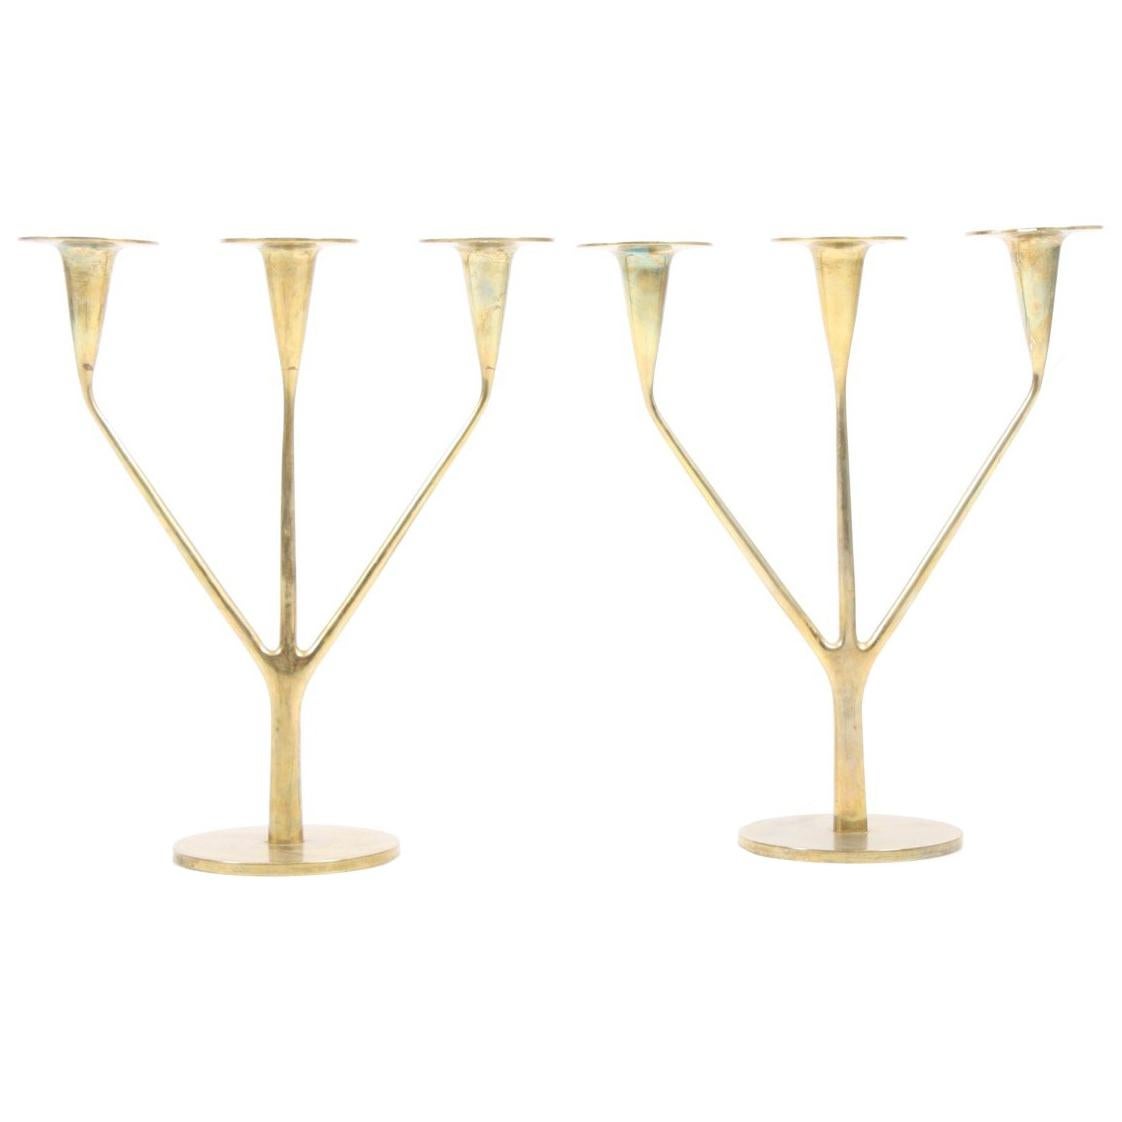 Pair of Large Table Candelabras in Brass